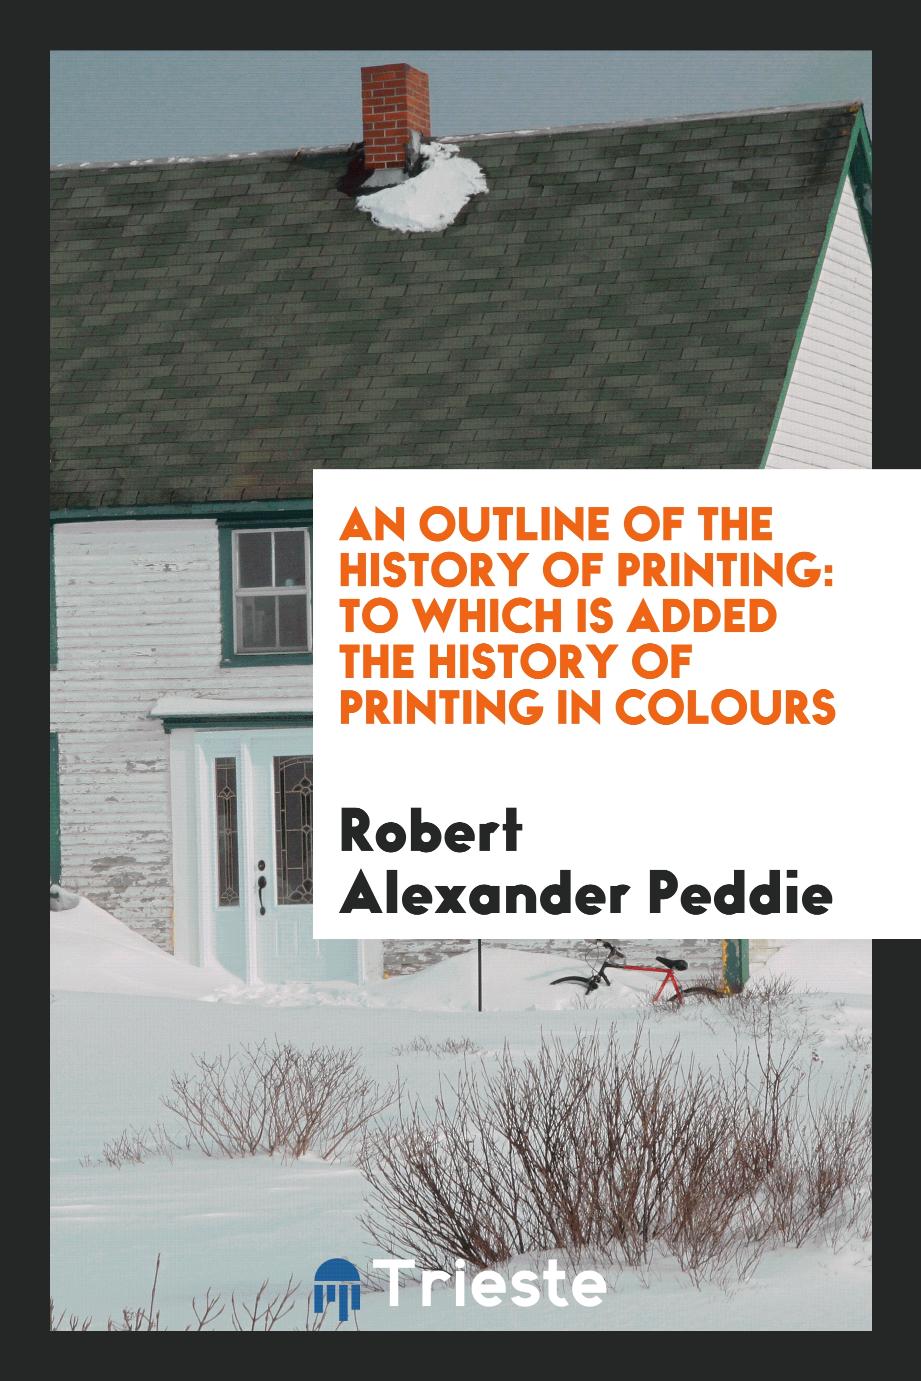 An outline of the history of printing: to which is added the history of printing in colours